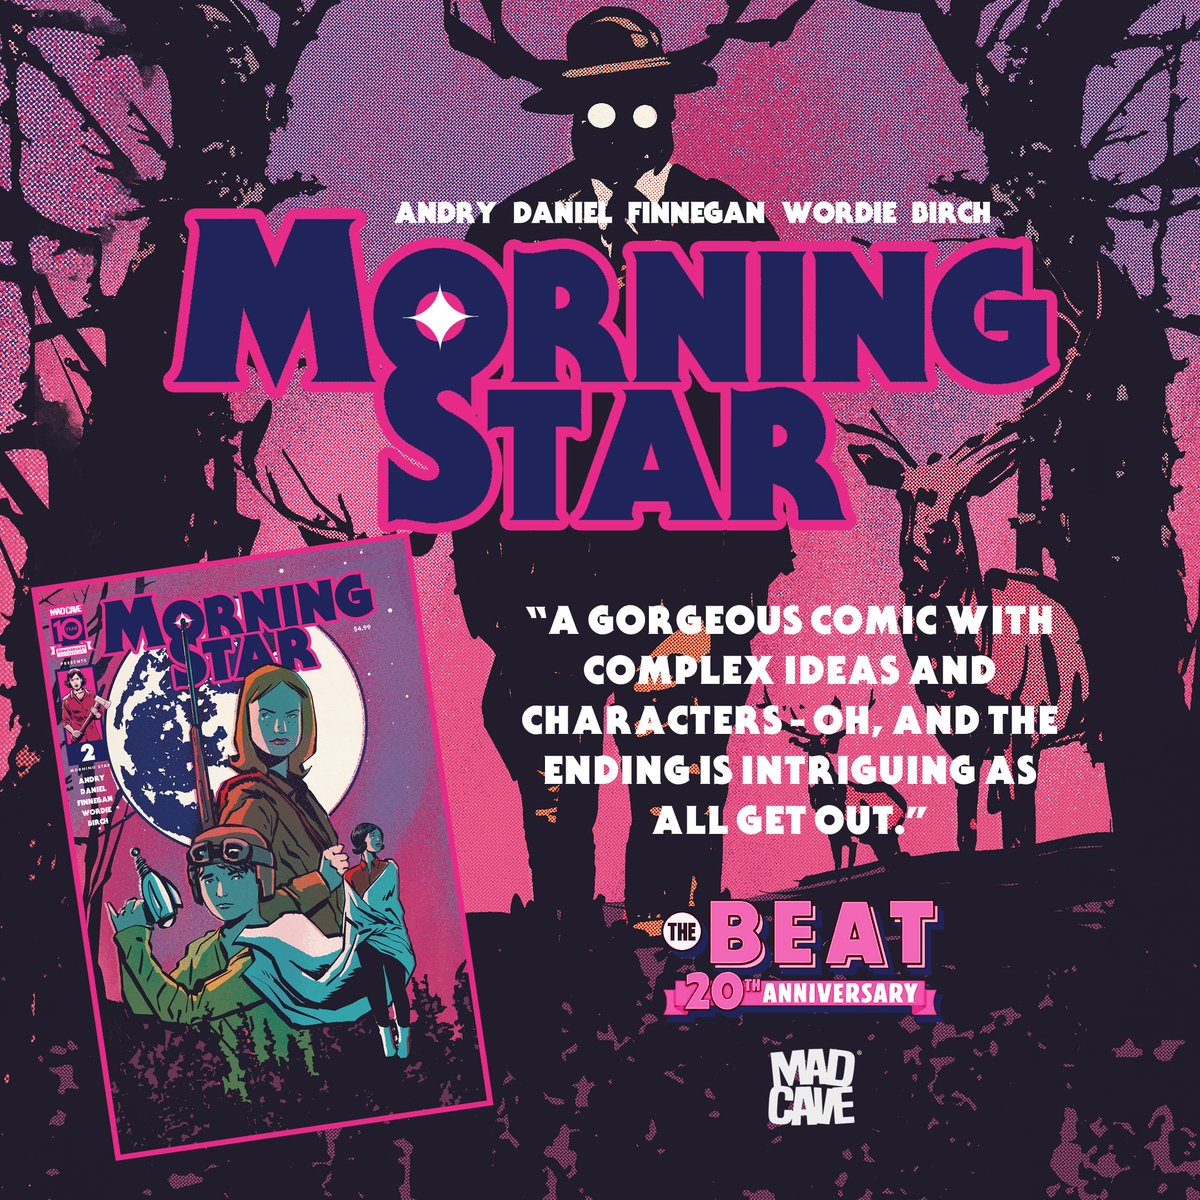 MORNING STAR gets a POTW from The Beat and the why of it is super, super cool! All cylinders firing on this one. Thank you, The Beat & Zack Quaintance